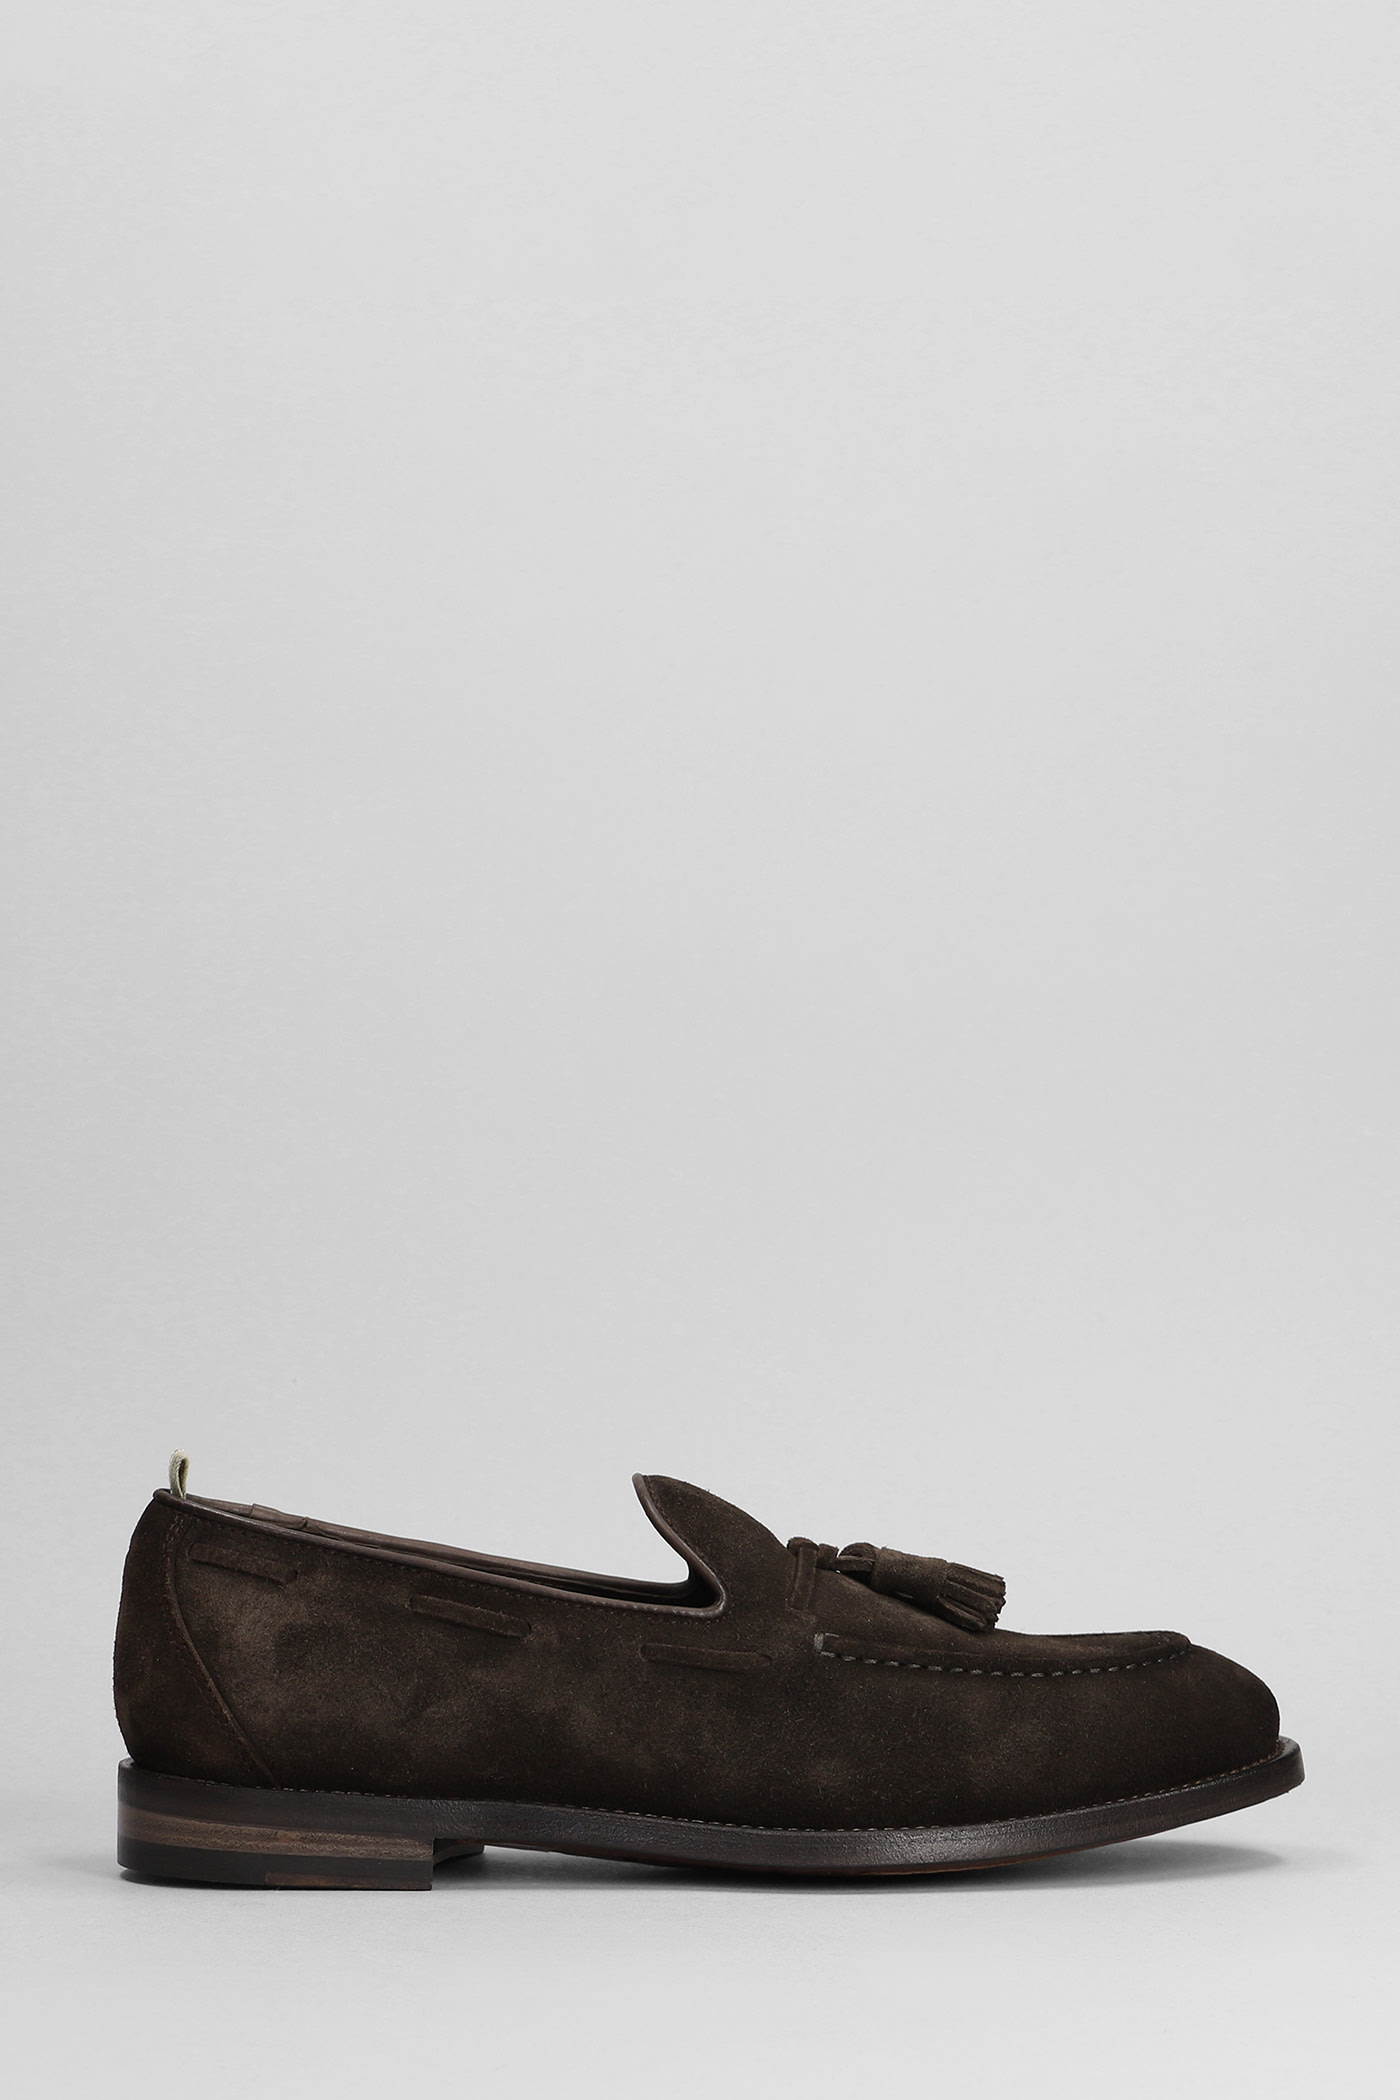 Officine Creative Tulane 004 Loafers In Brown Suede